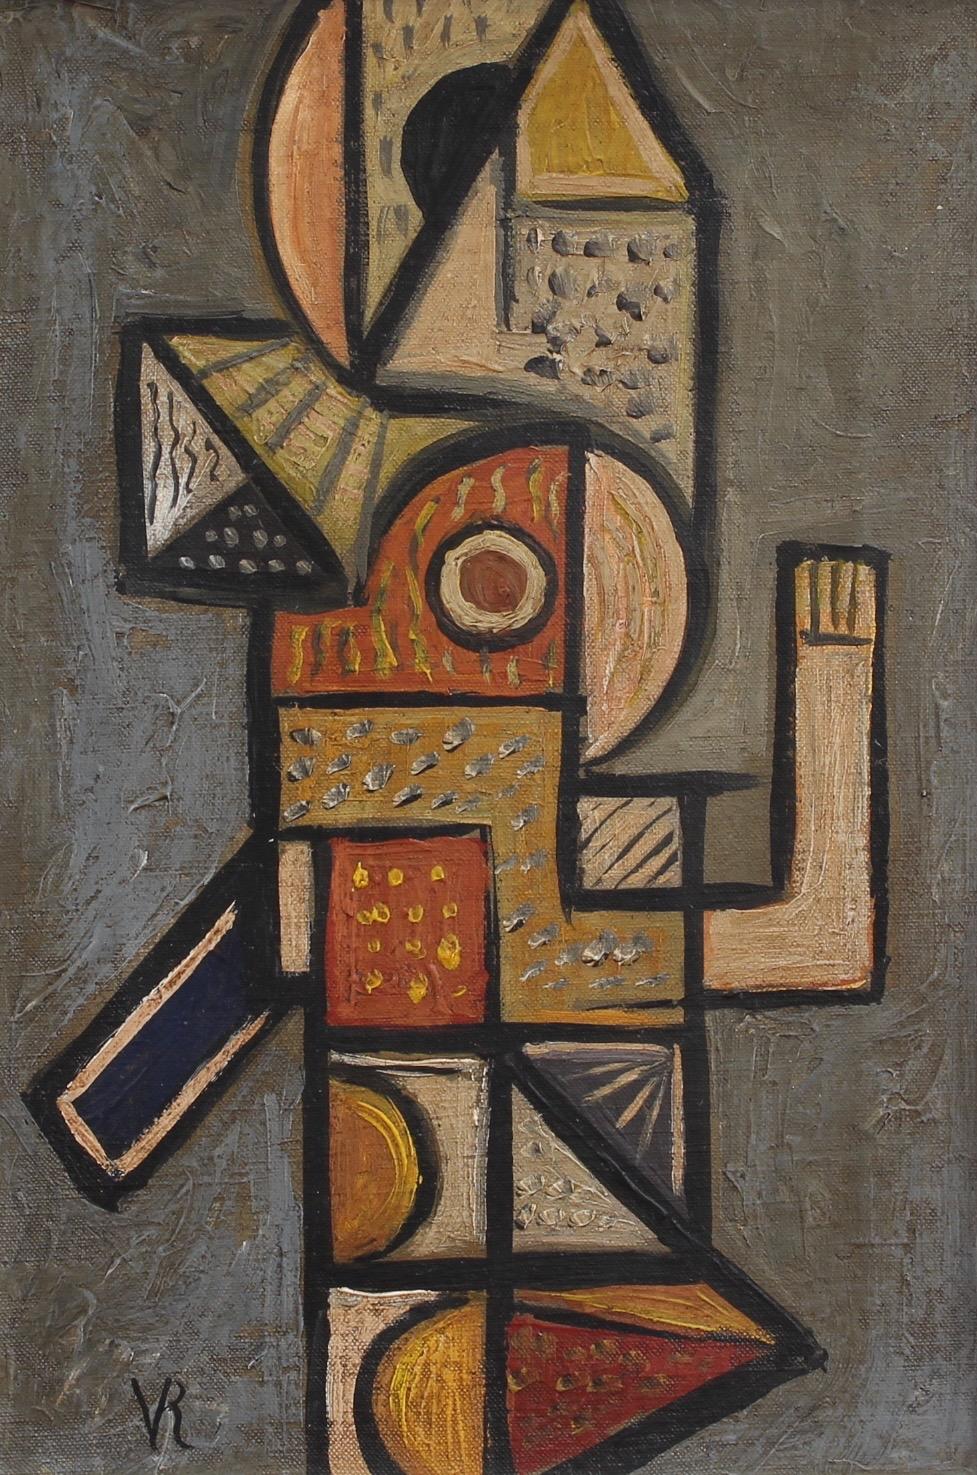 Unknown Abstract Painting - 'Portrait of a Young Man II' by V.R., Mid-Century Abstract Cubist Oil Painting